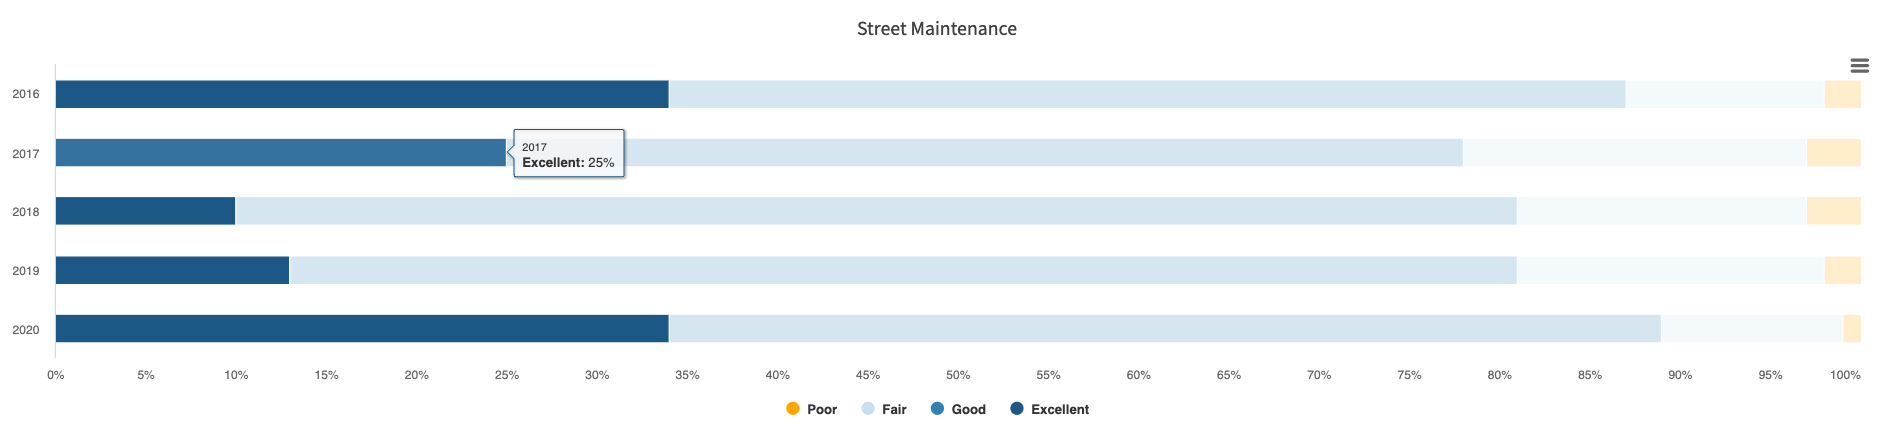 Screenshot of highlighted section of City of Minnetonka's quality of street maintenance public works performance measure chart